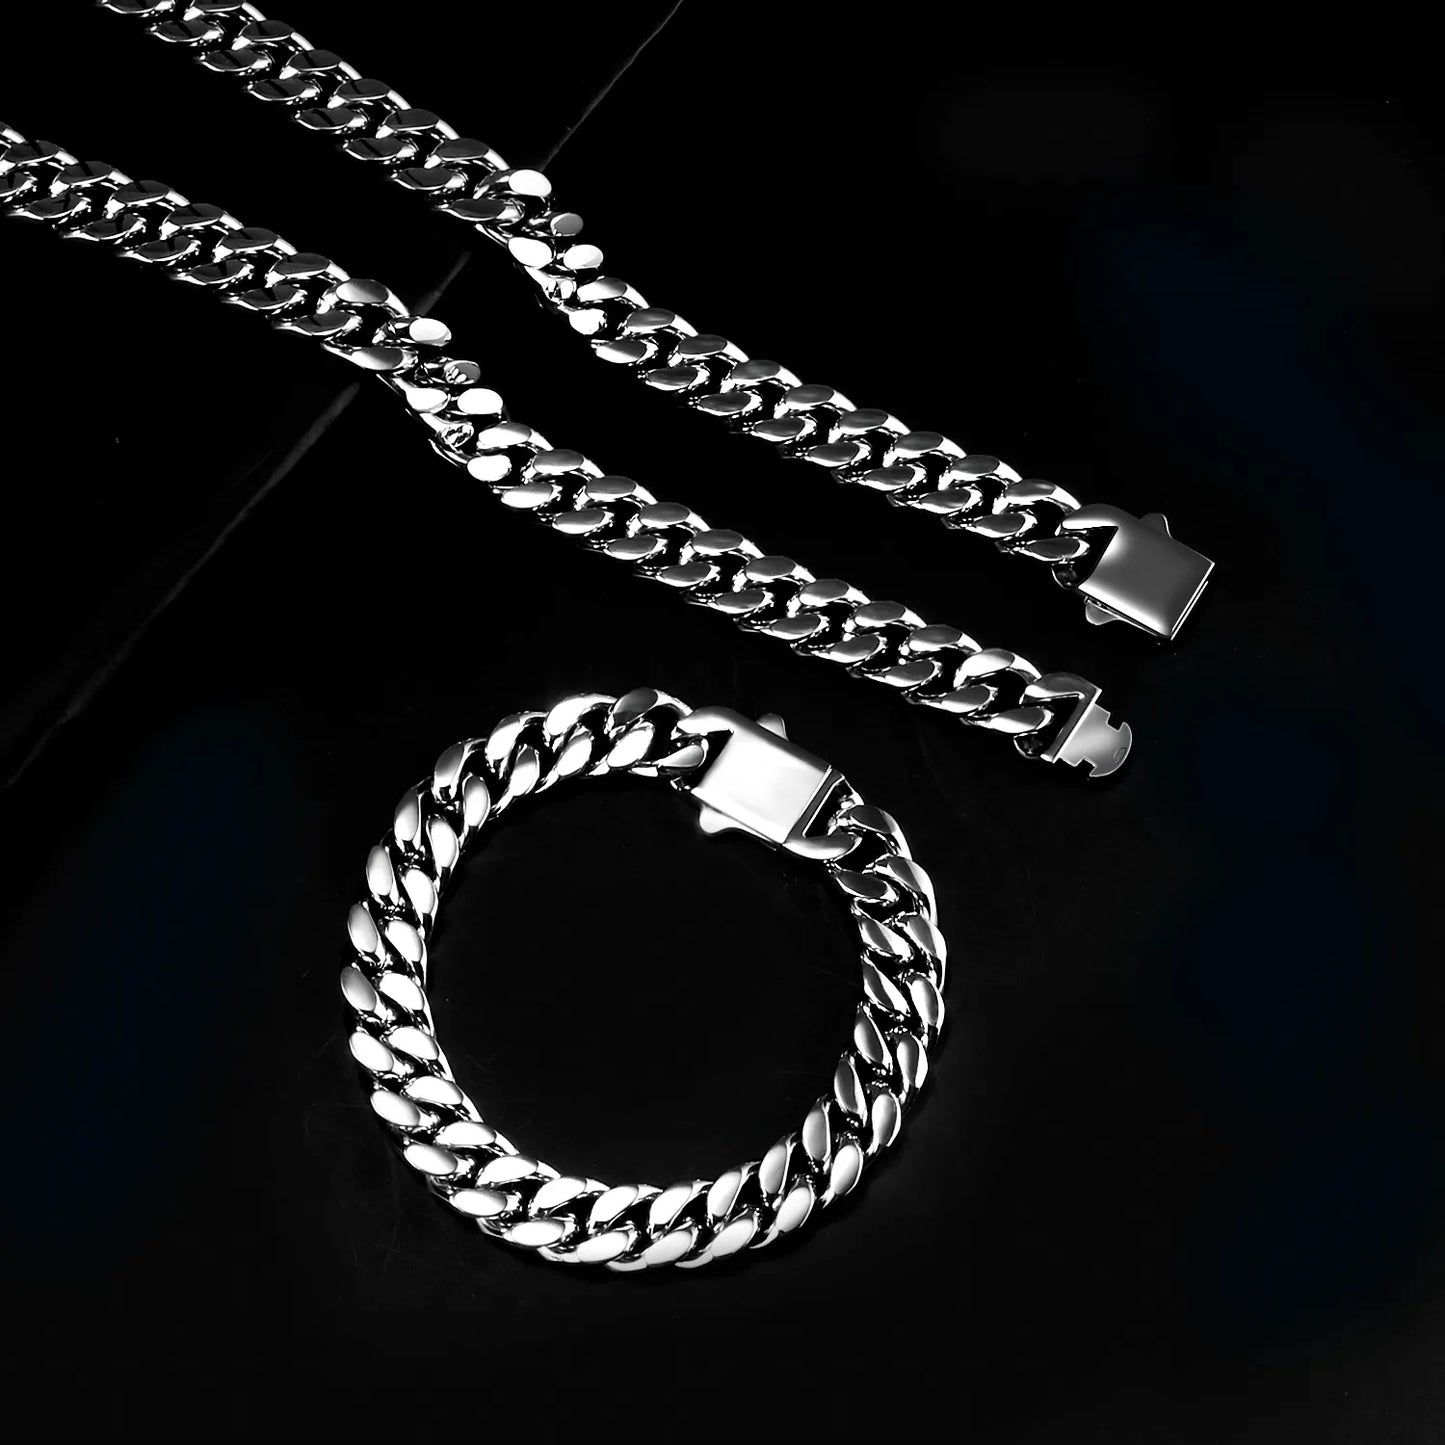 Stainless Steel Chain Necklace Bracelet